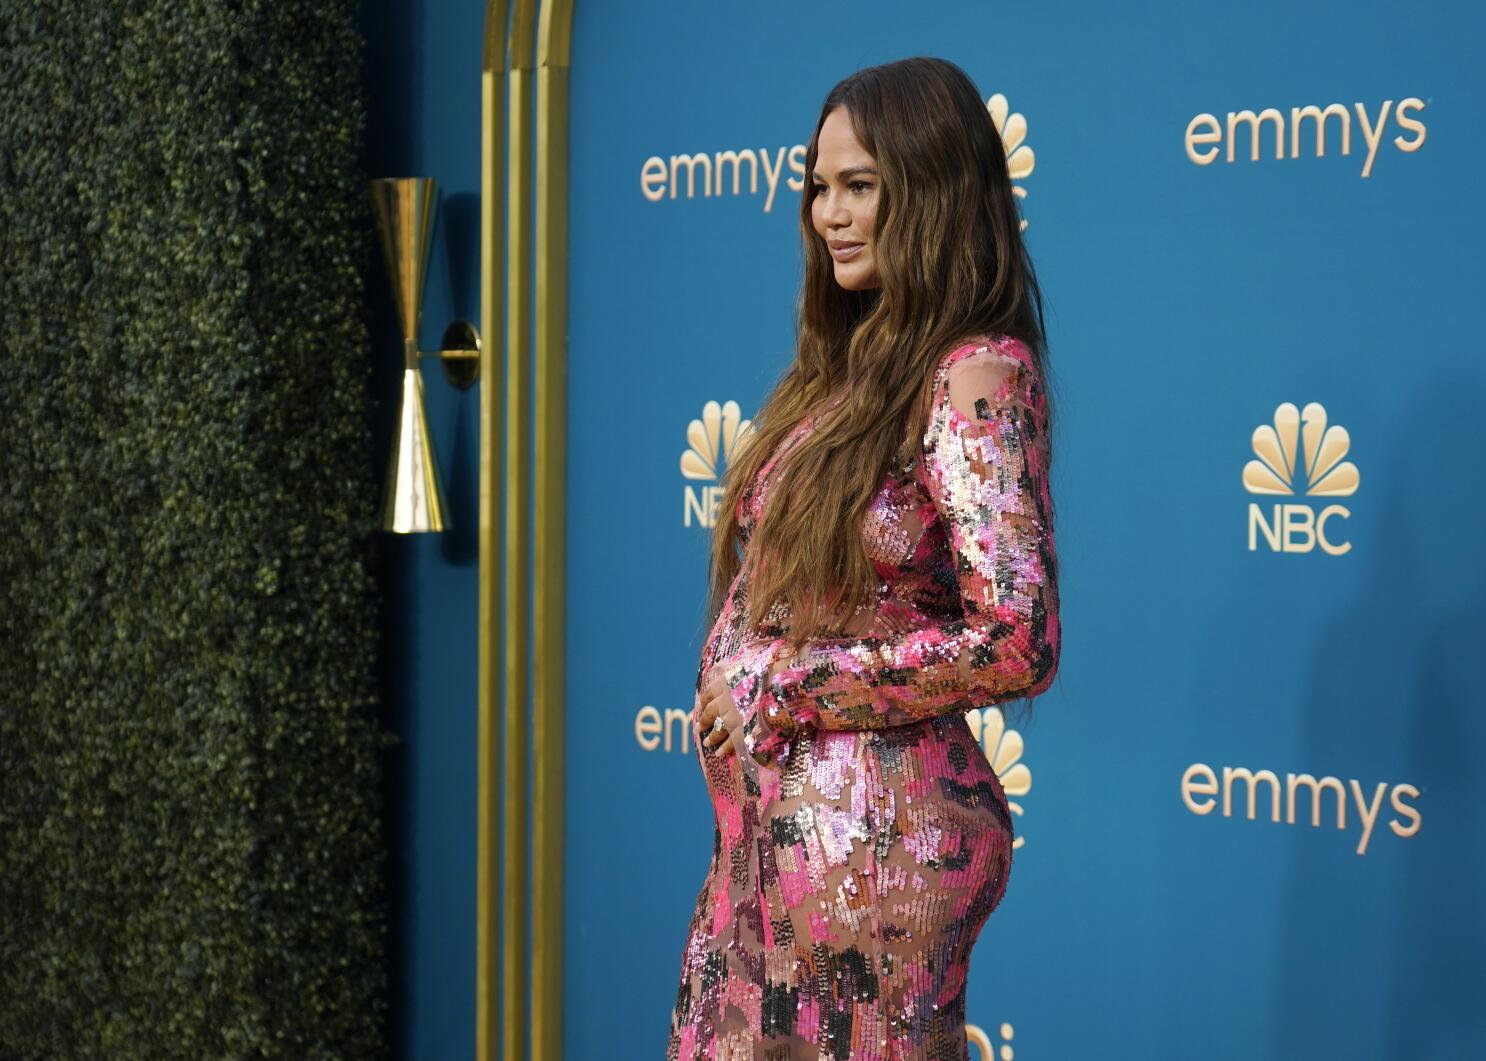 Chrissy Teigen Responds to Critics After Sharing Her Abortion Story